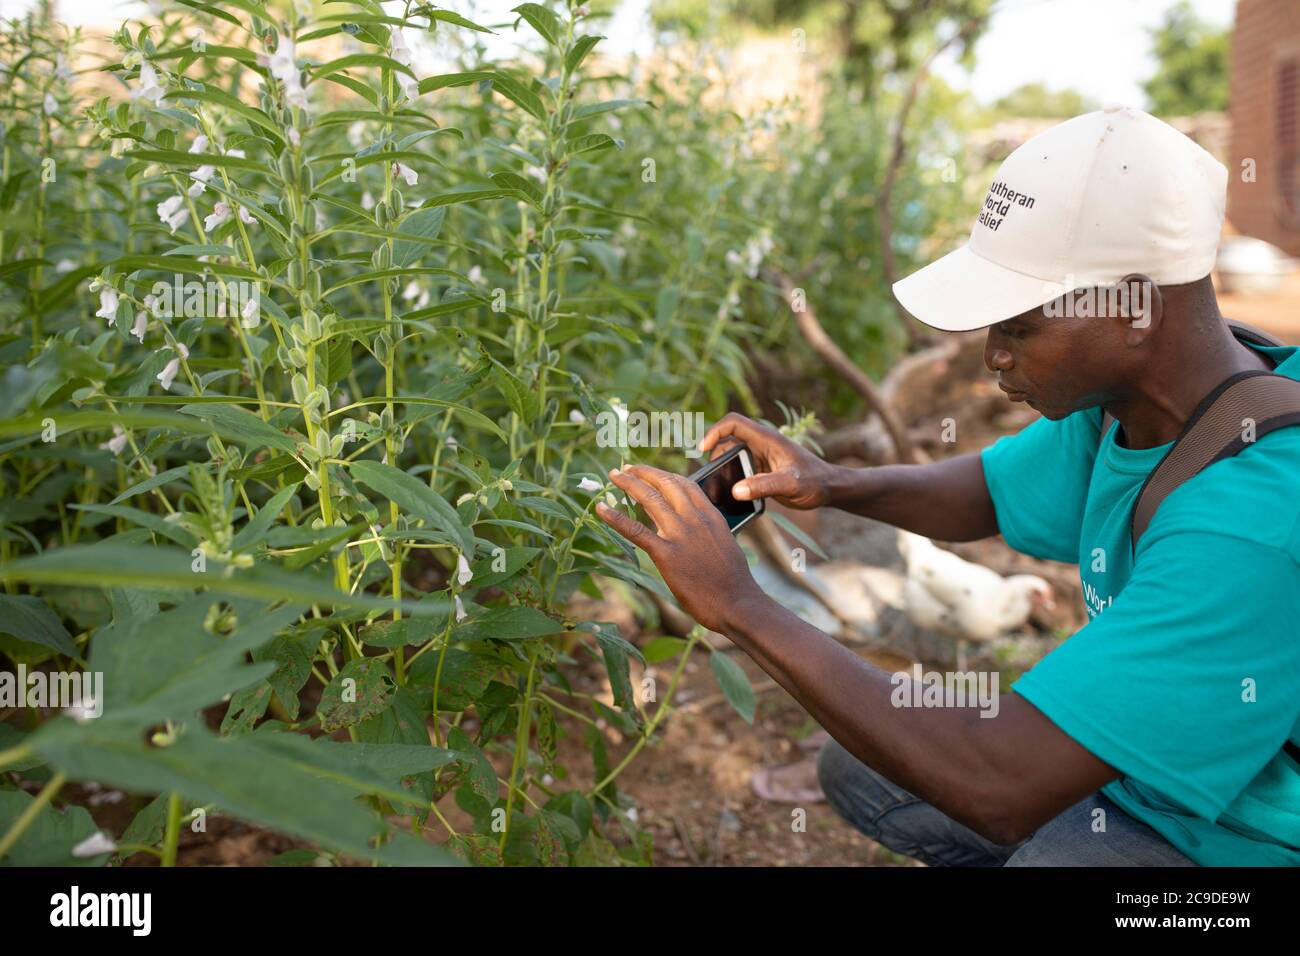 A farmer uses the TaroWorks application on his mobile phone to access training modules on sesame farming on his farm in Mouhoun Province, Boucle de Mouhoun Region, Burkina Faso, West Africa. Stock Photo